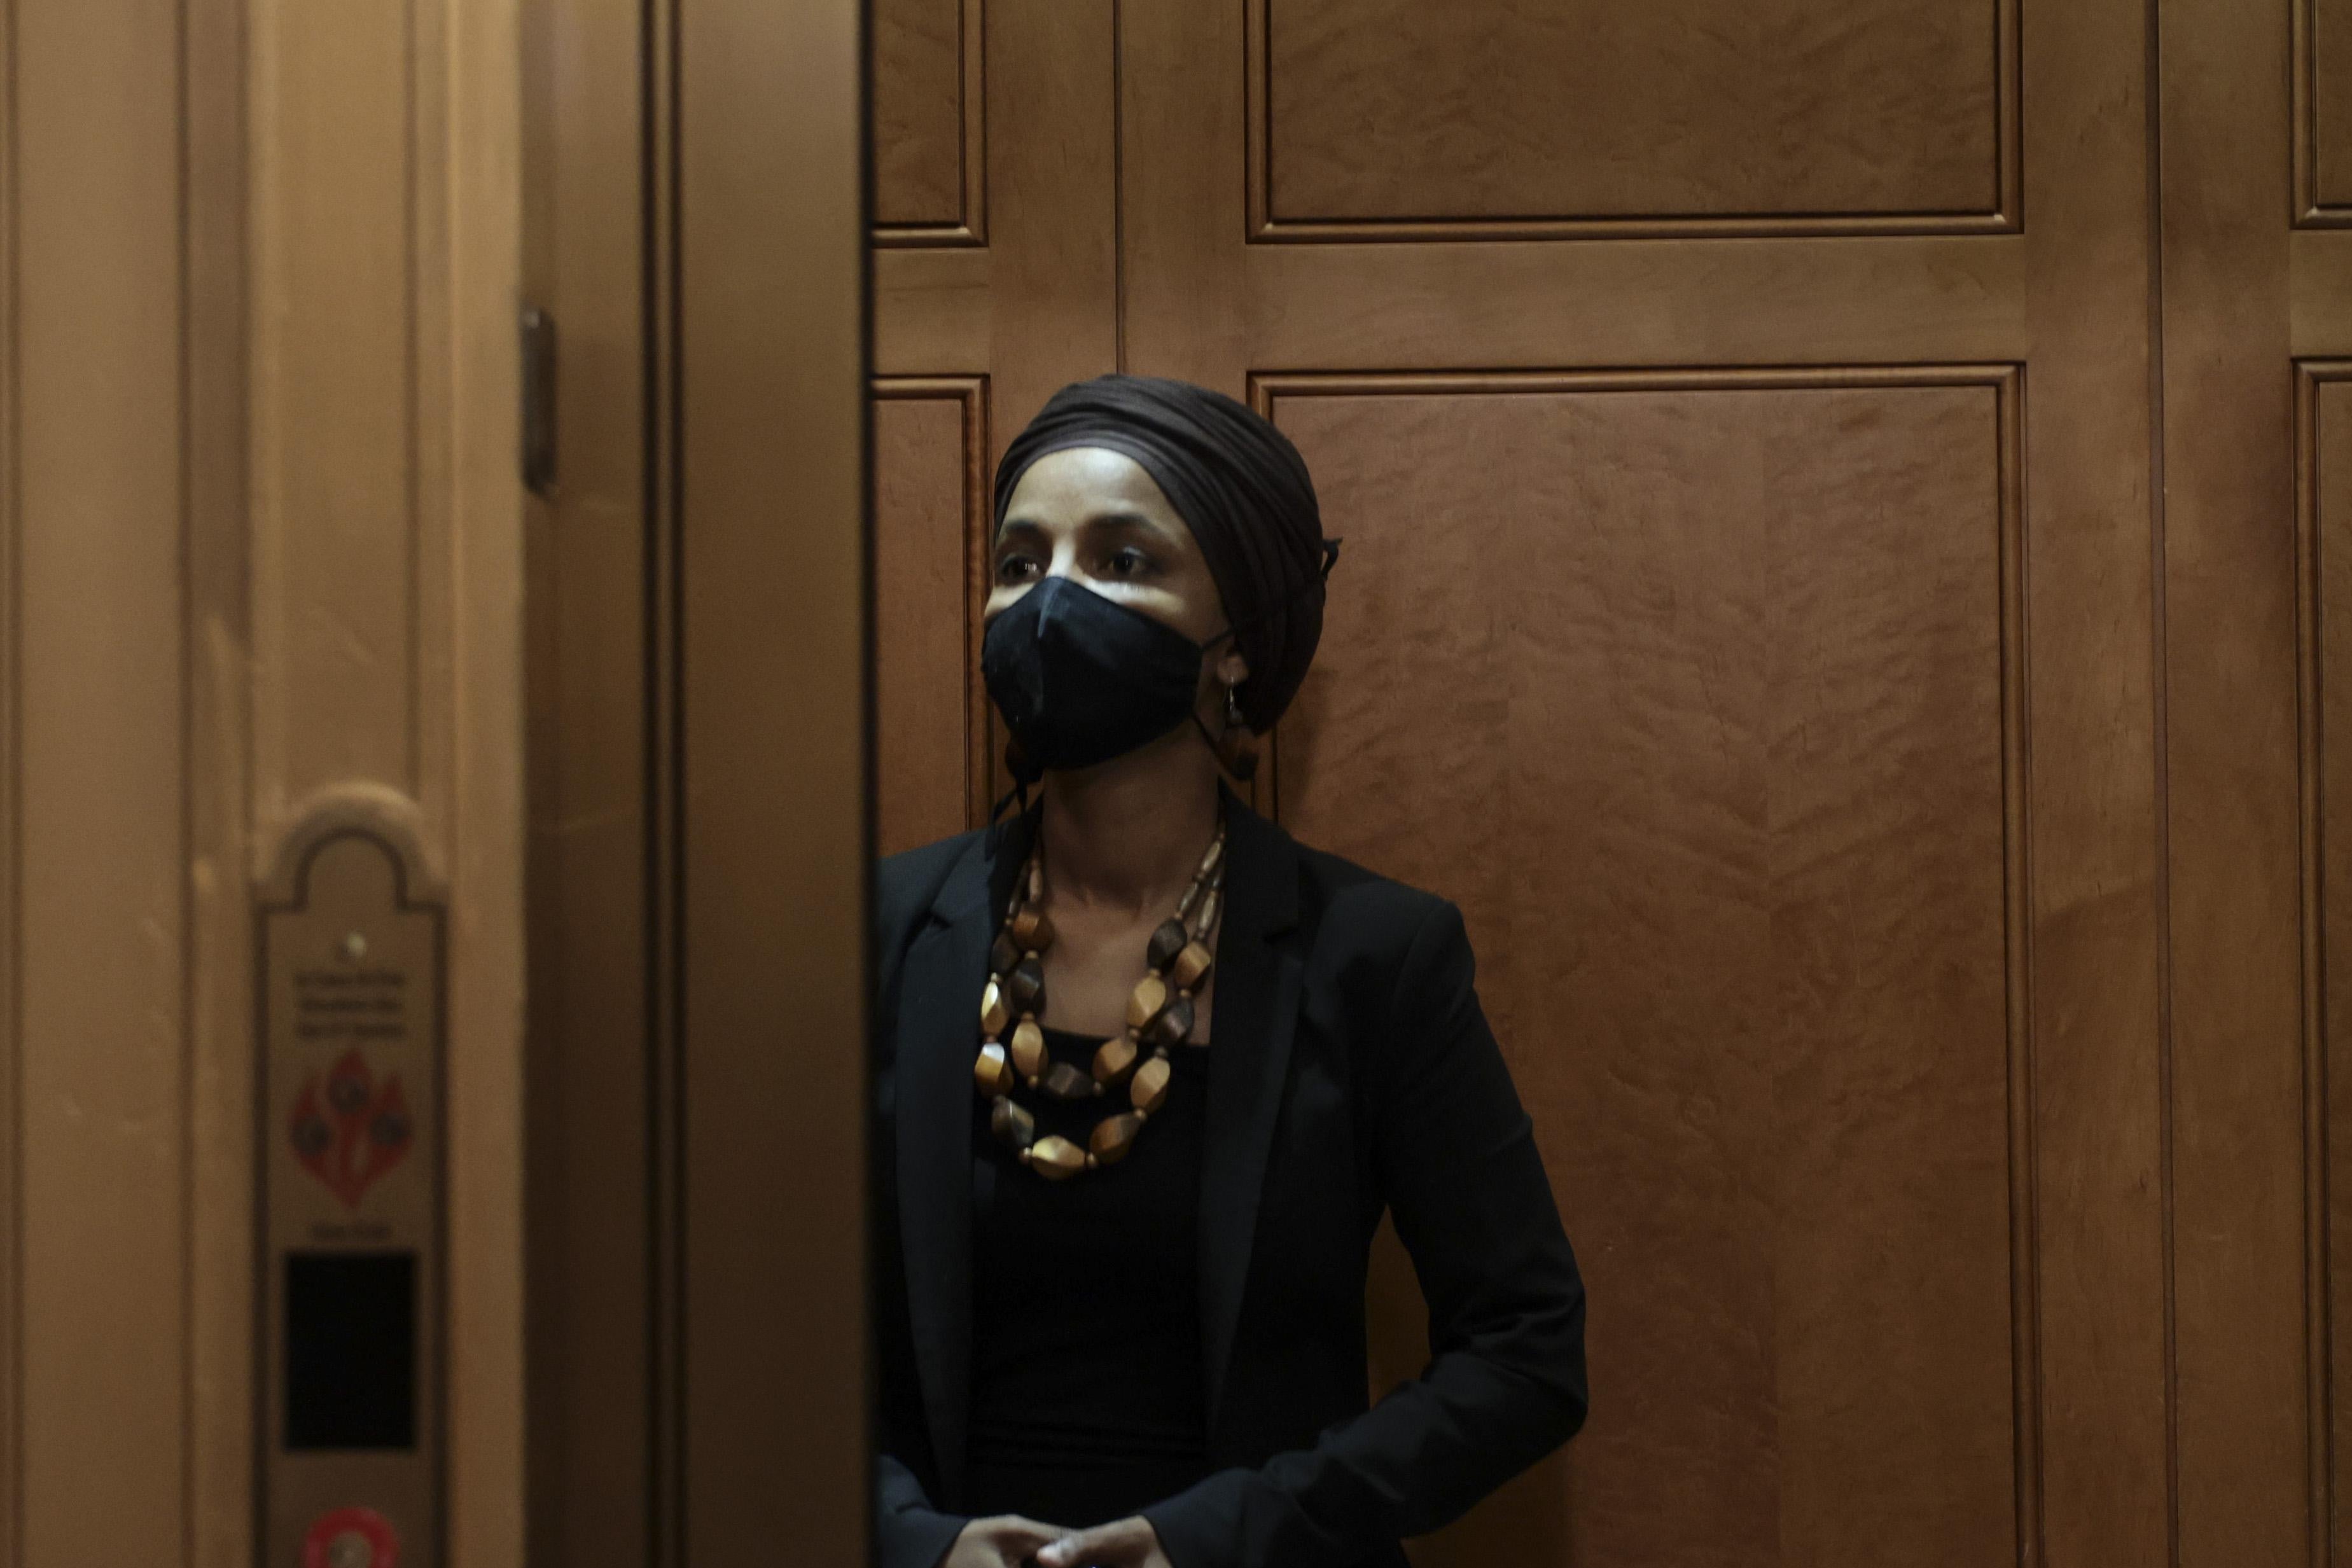 Rep. Ilhan Omar (D-MN) rides in an elevator outside the House Chambers of the U.S. Capitol on October 12, 2021 in Washington, D.C.